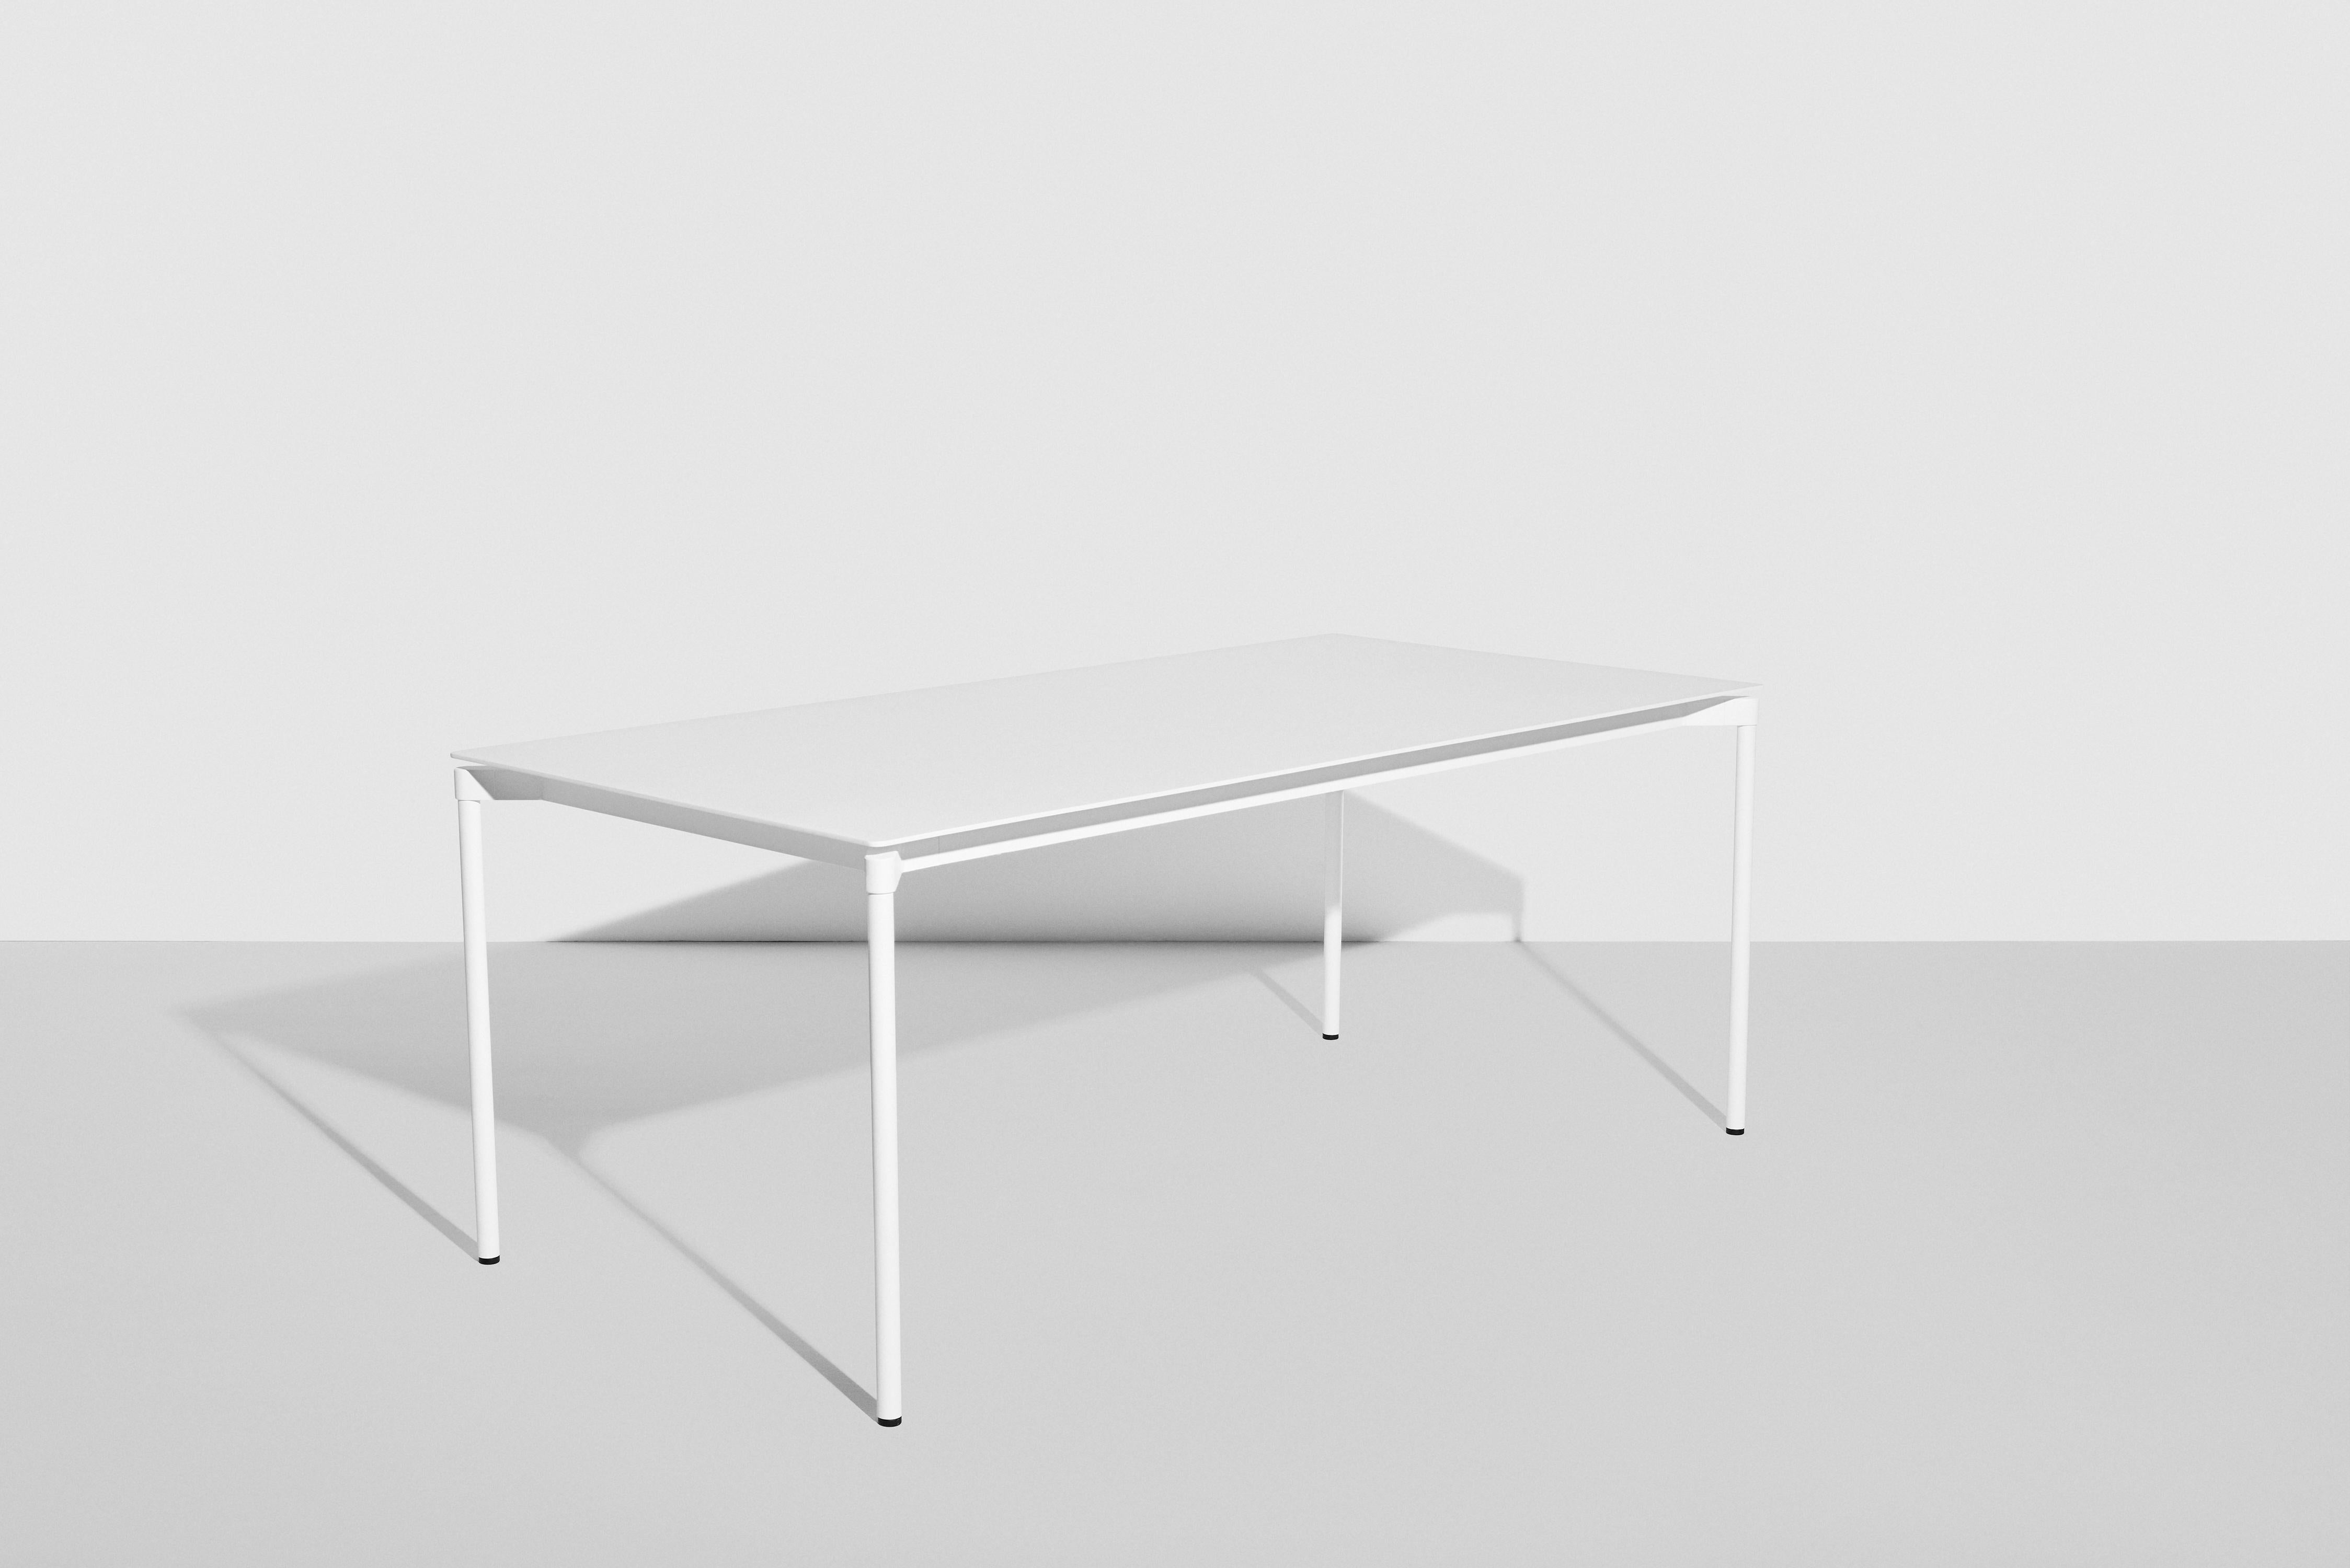 Chinese Petite Friture Fromme Rectangular Table in White Aluminium by Tom Chung For Sale